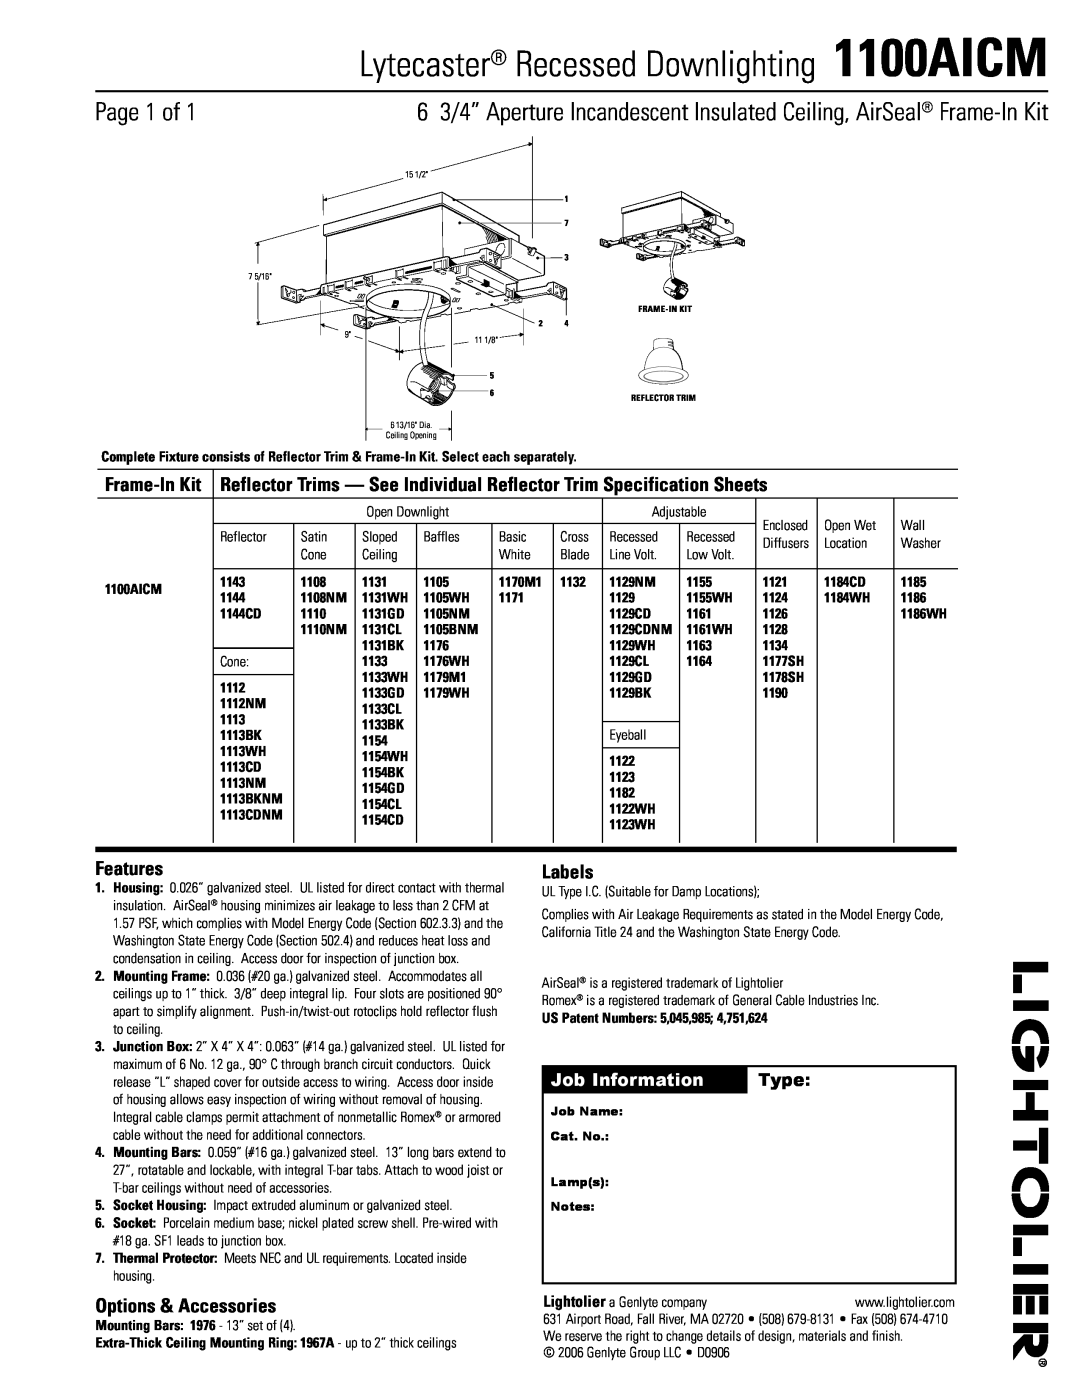 Lightolier specifications Lytecaster Recessed Downlighting 1100AICM, Page  of, Features, Options & Accessories, Labels 